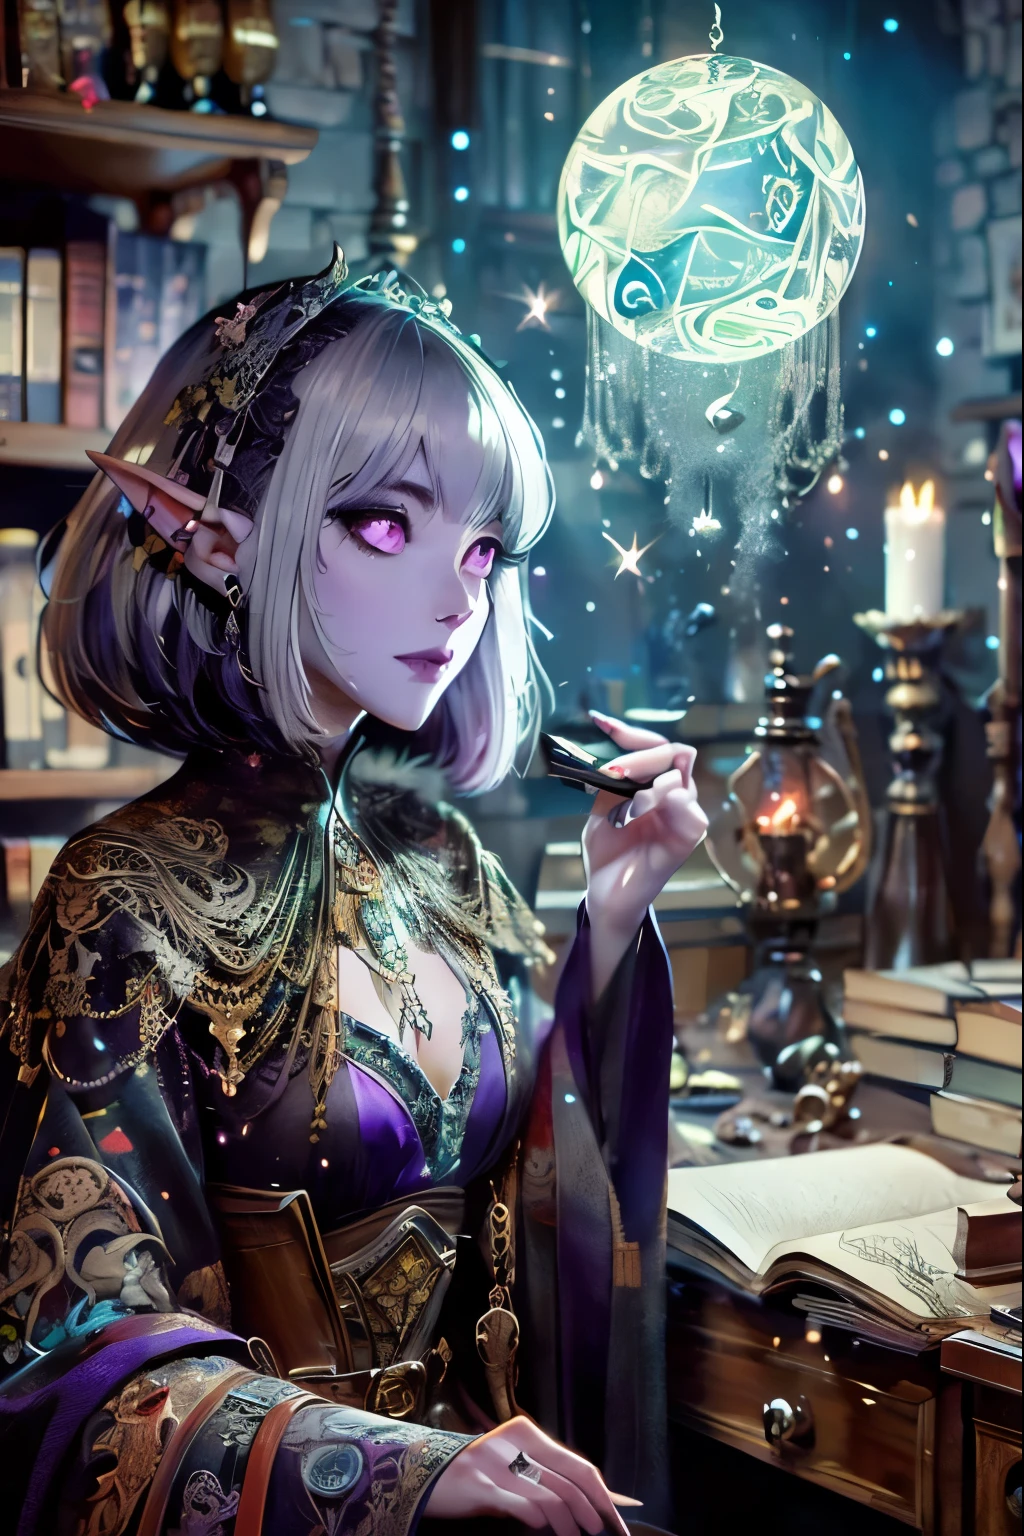 (Ultra-detailed face, open mouth), (Fantasy Illustration with Gothic & Ukiyo-e & Comic Art), (Full Body, A middle-aged dark elf woman with white hair, blunt bangs, very long disheveled hair, and dark purple skin, lavender eyes), (She is wearing a gorgeous wizard's robe of red silk with lace for women and thin black leather woven sandals), She peers through a magnifying glass at a sparkling, burning, magical clockwork artifact on a large wooden desk and examines it intently), BREAK (Ancient artifacts that look like junk are lying in disarray in the background, and bookshelves are crammed with books of magic)